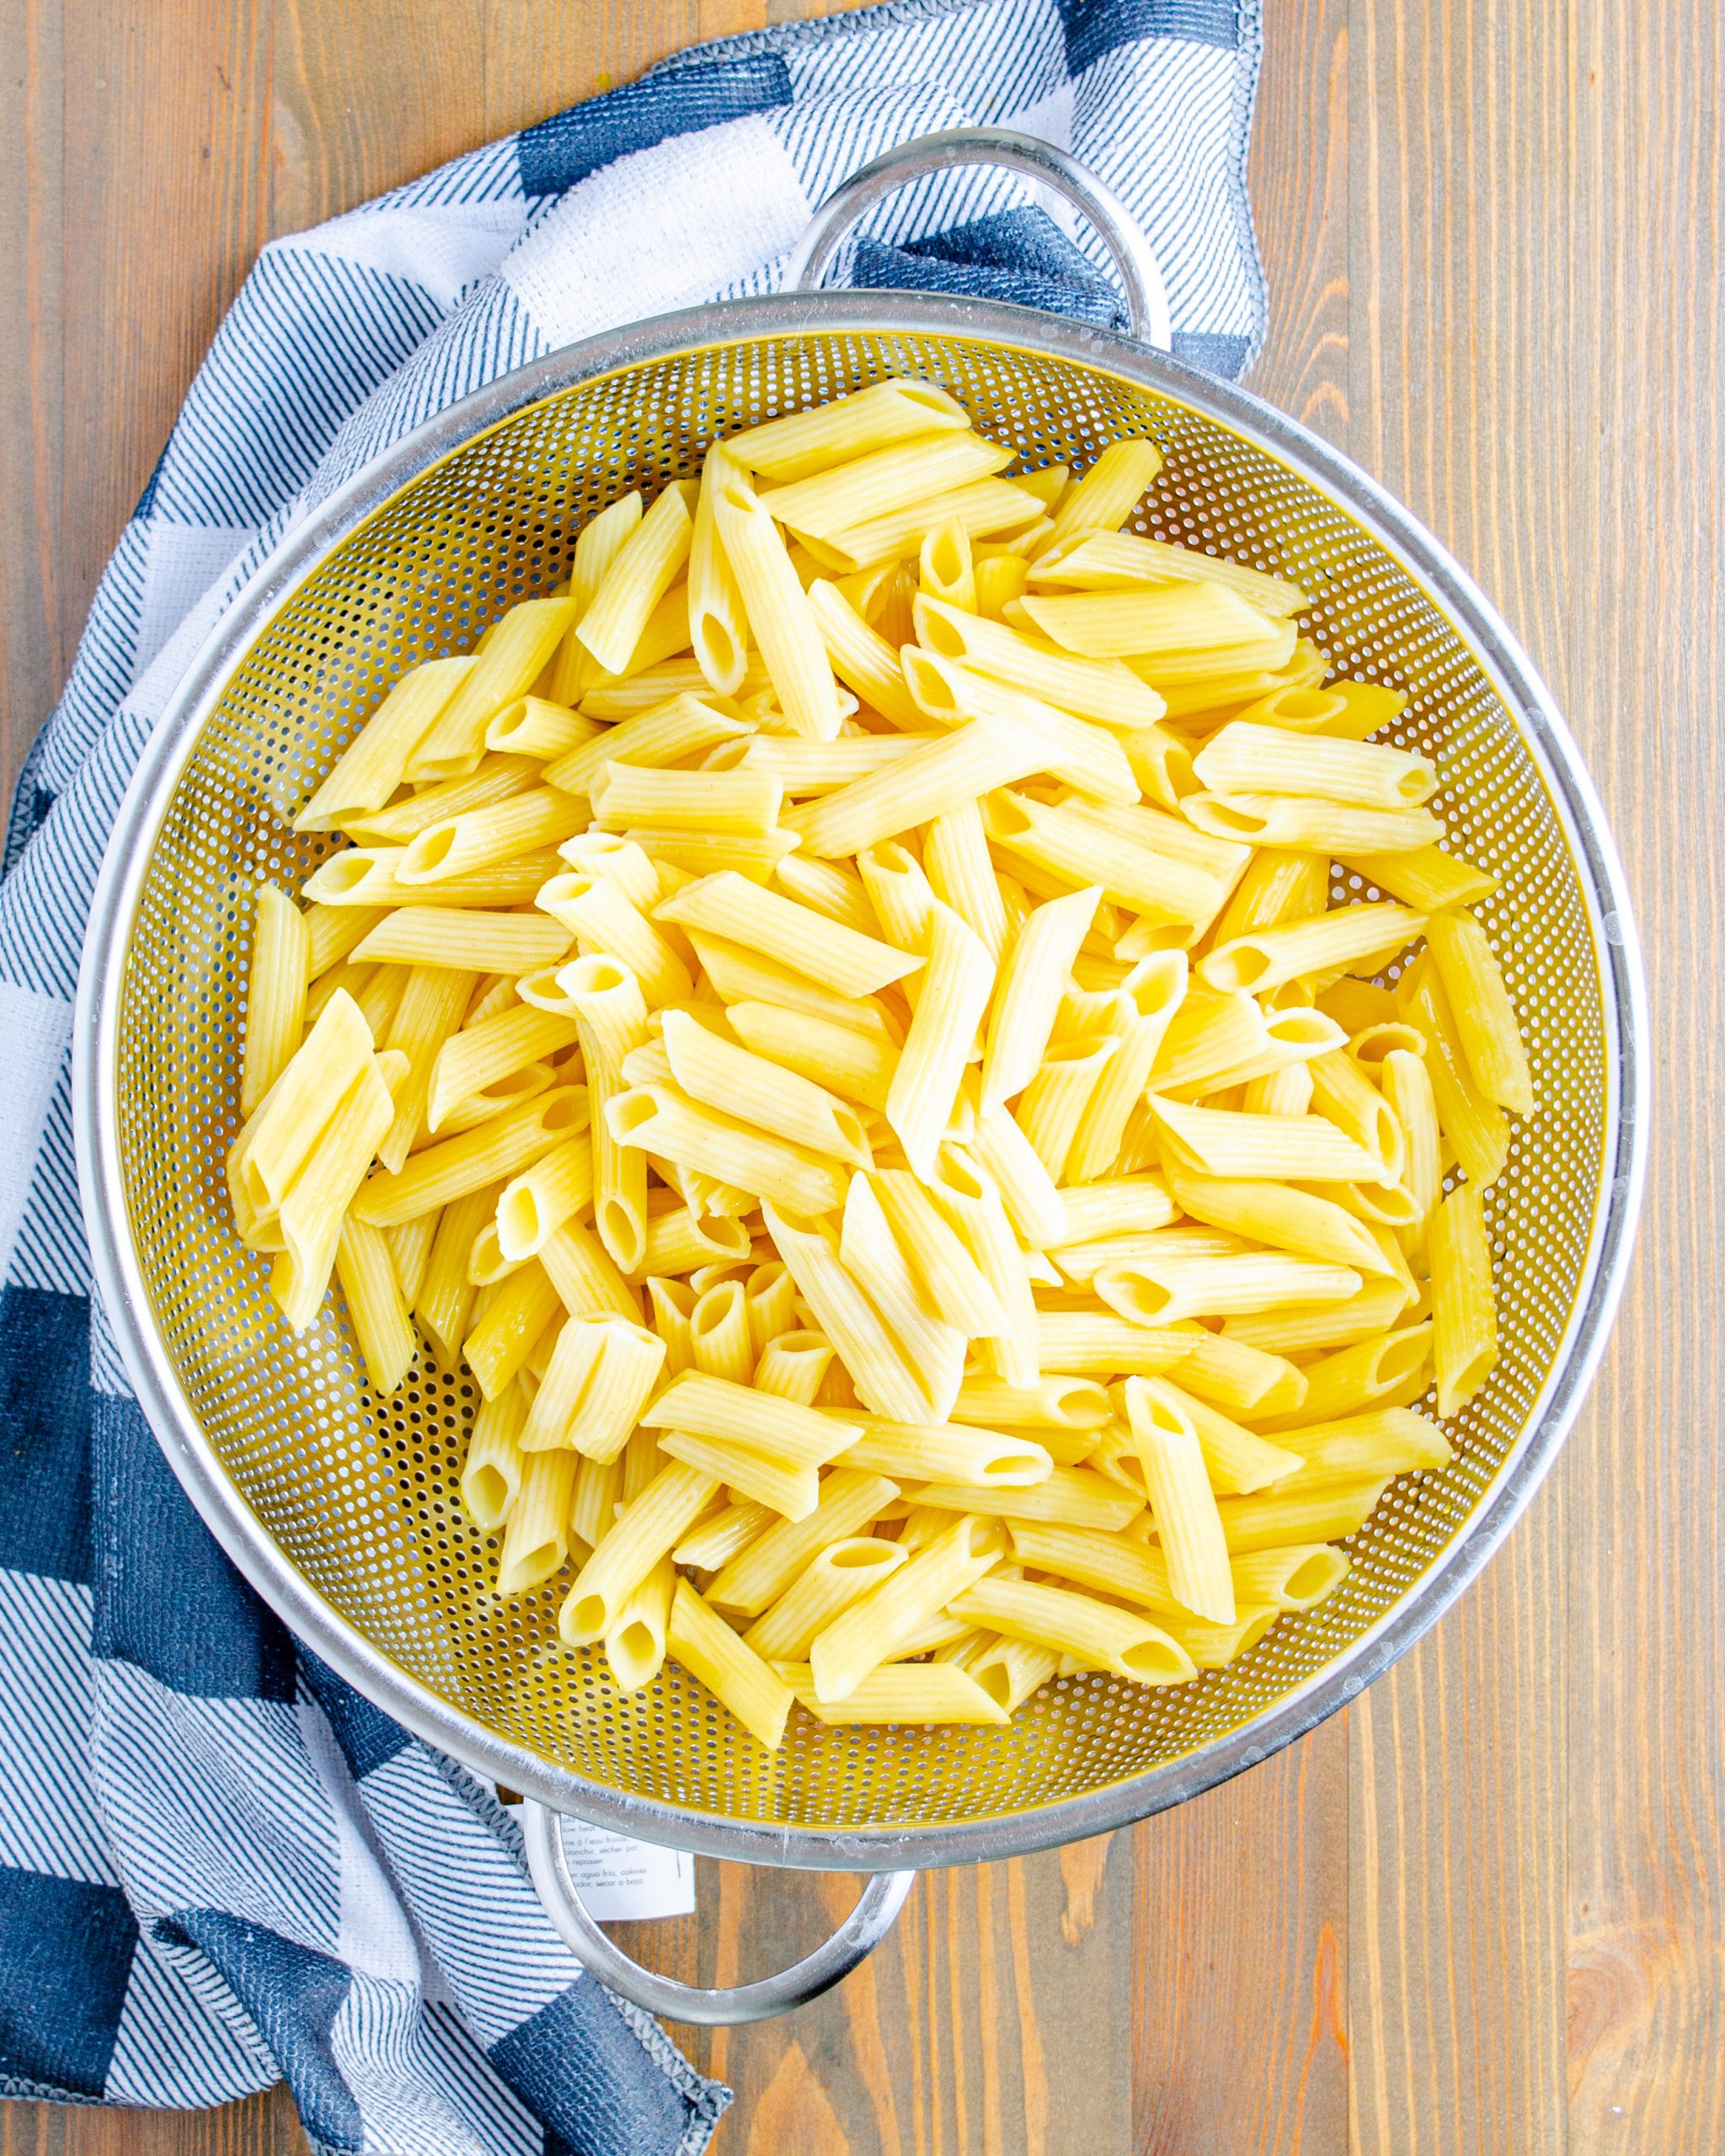 Cook the pasta until done to your liking, drain and reserve ½ cup of the cooking liquid.